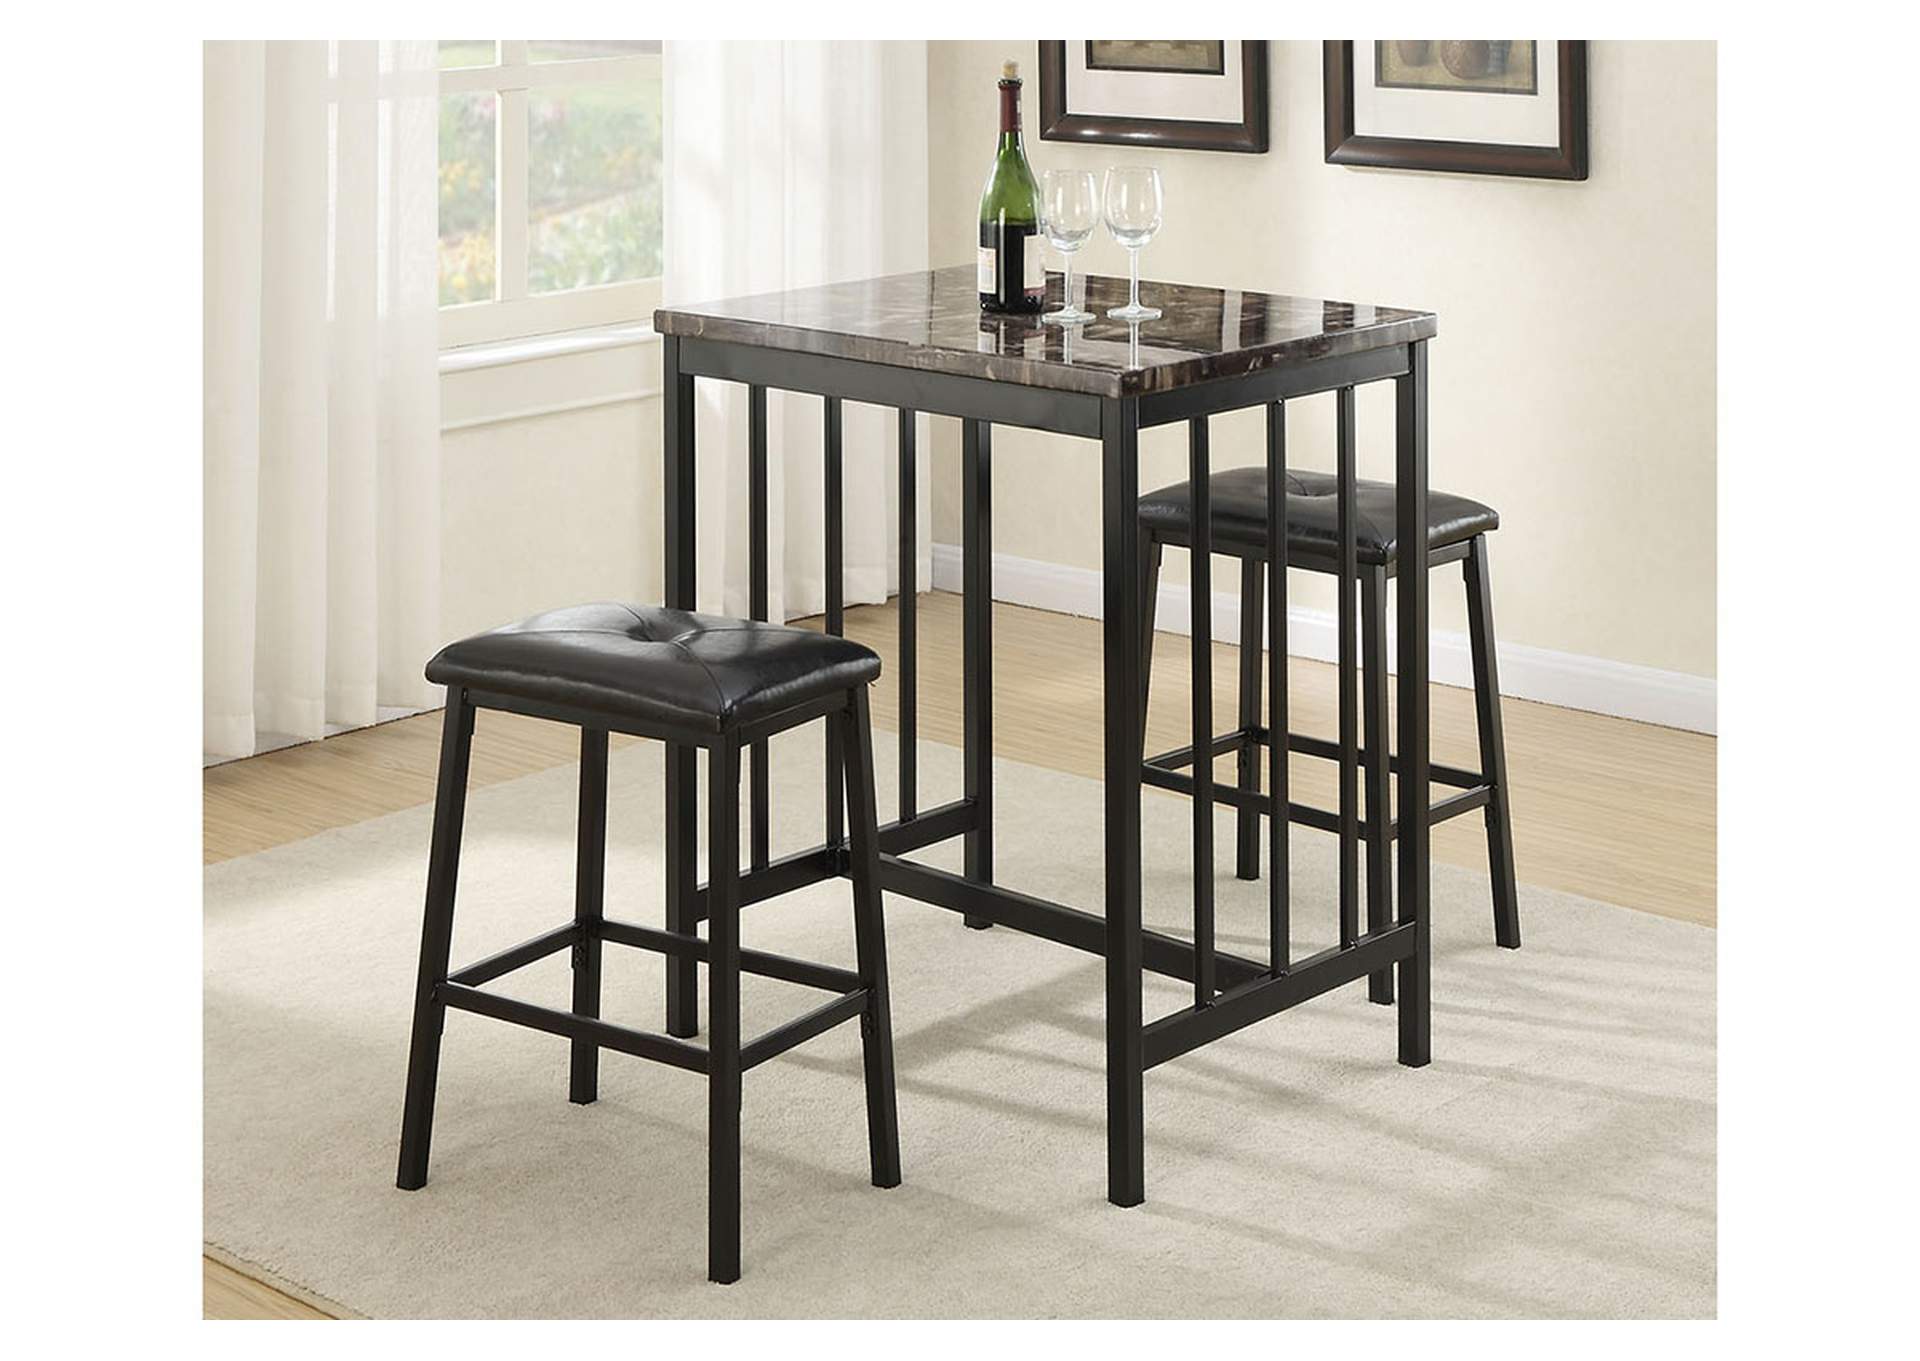 3 Piece Counter Height Dining Set,Poundex